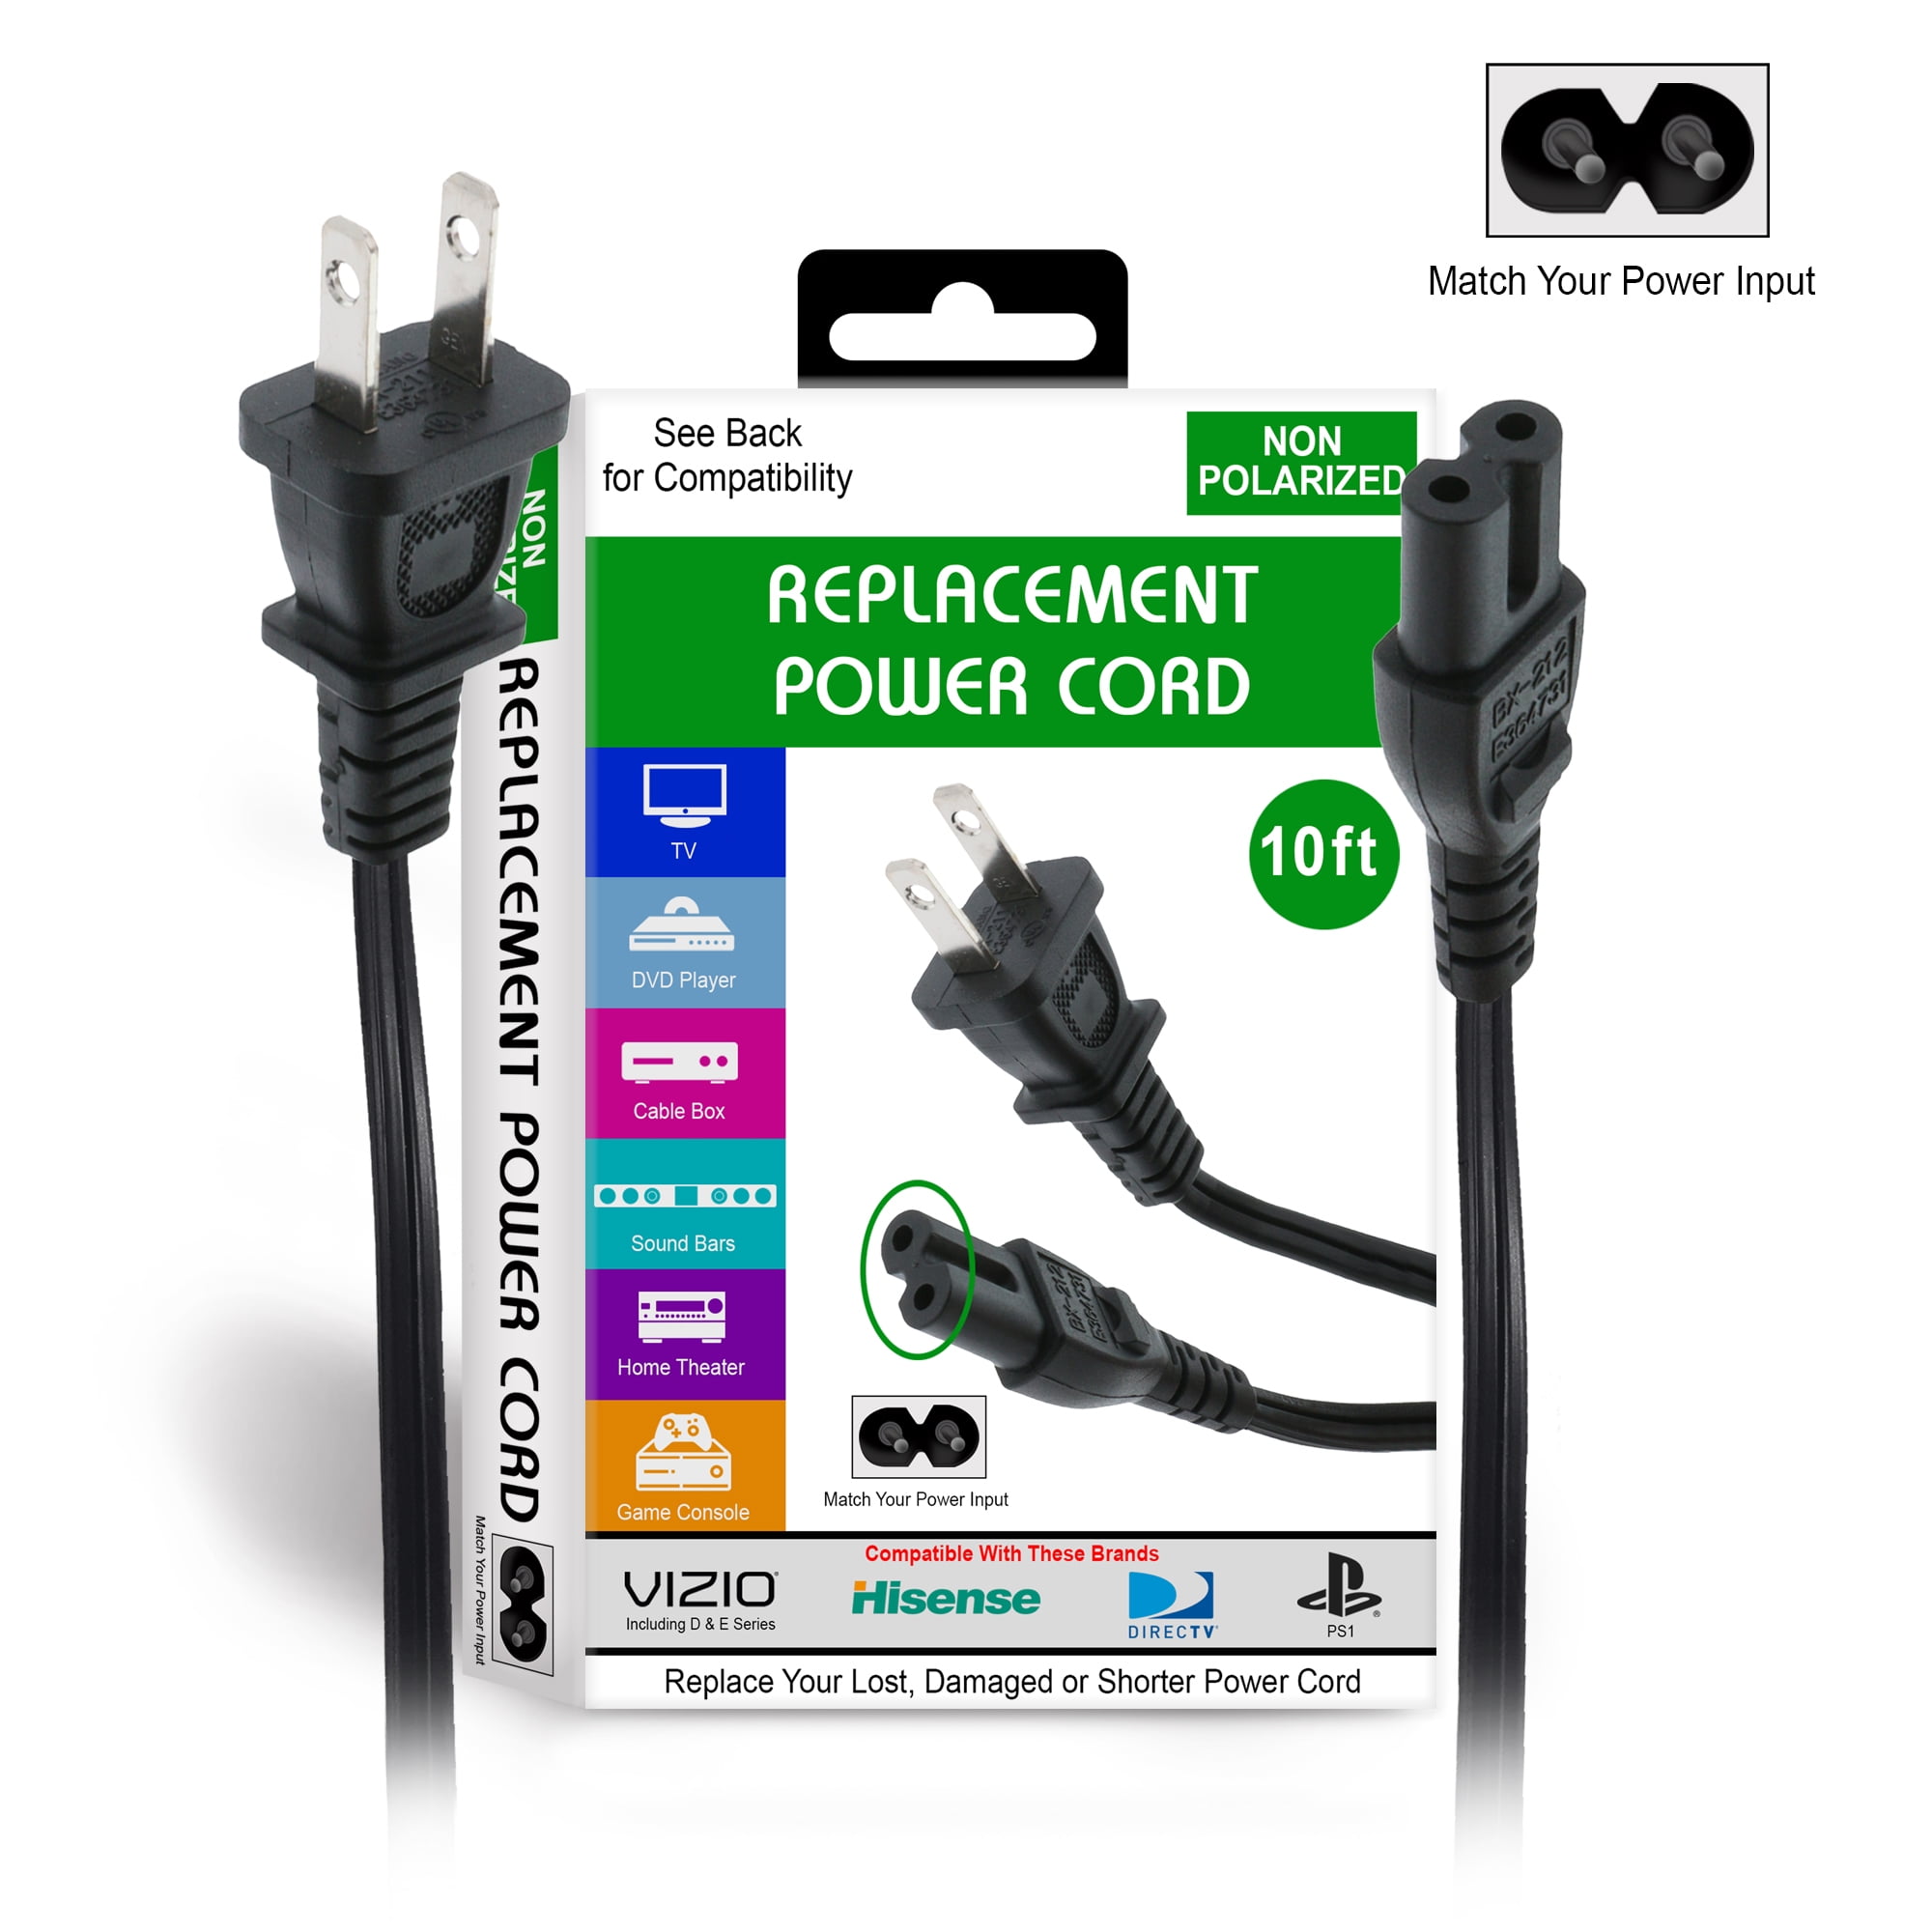 10ft Non-Polarized Replacement Power Cord, Works With Game Consoles, Cable Boxes, Printers